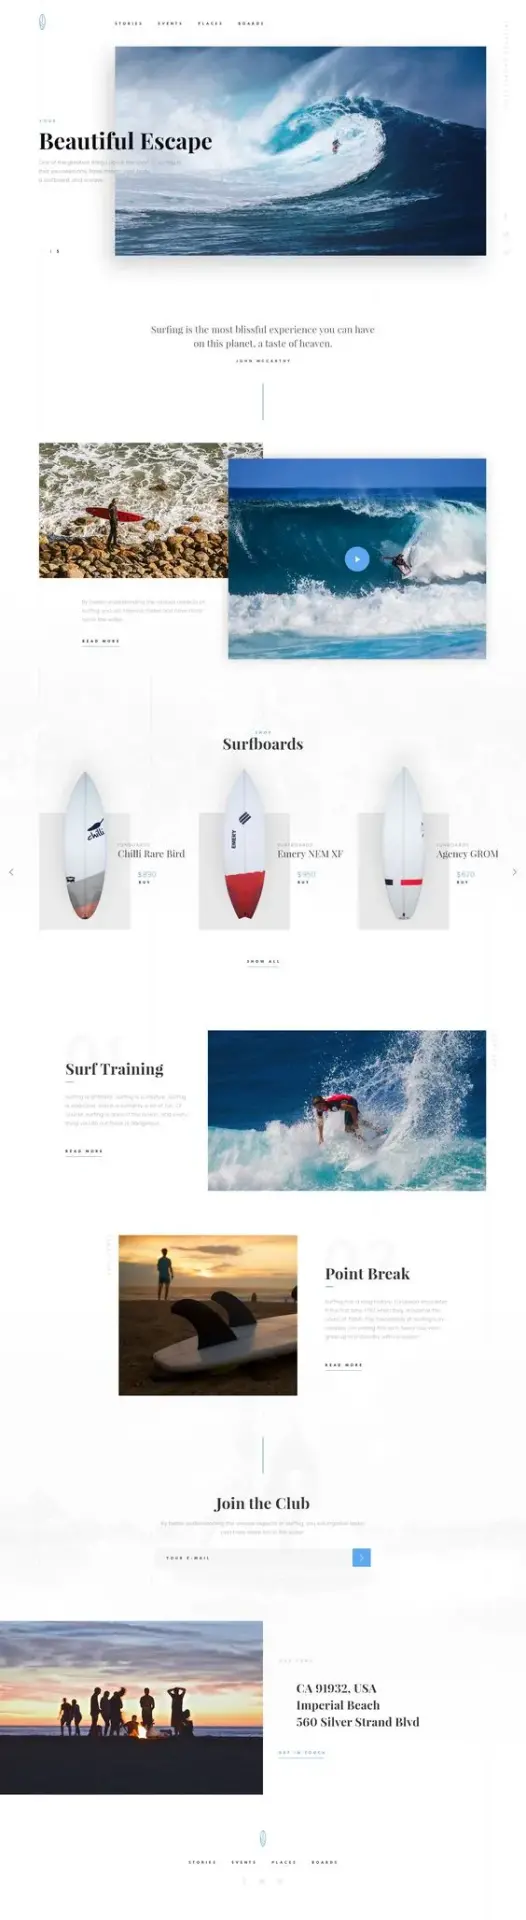 Surfing free theme psd